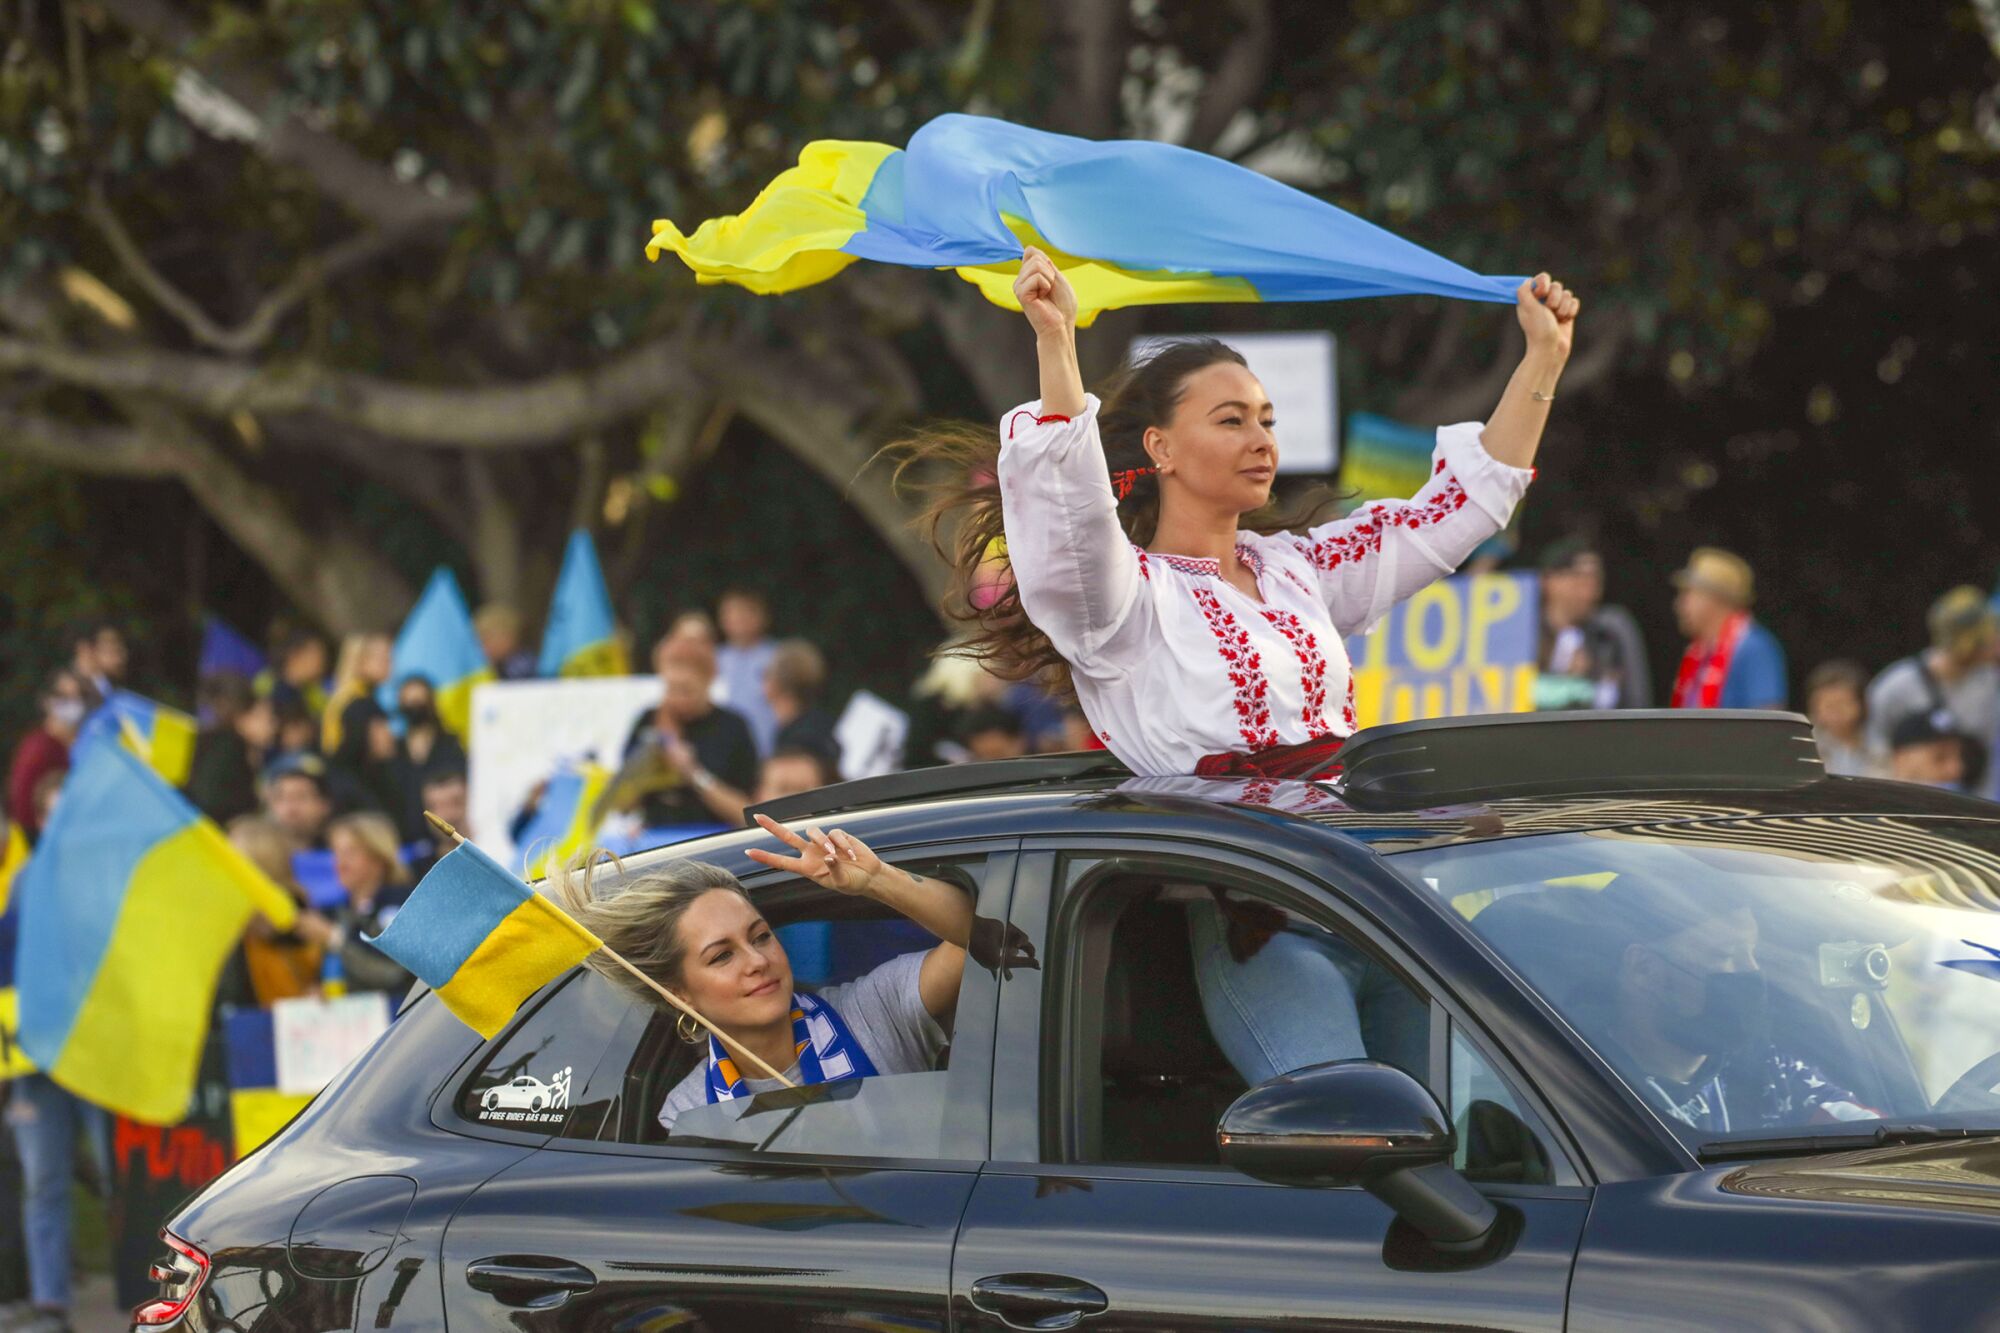 Demonstrators protest the Russian invasion of Ukraine at the intersection of Sepulveda Blvd. and Santa Monica Avenue